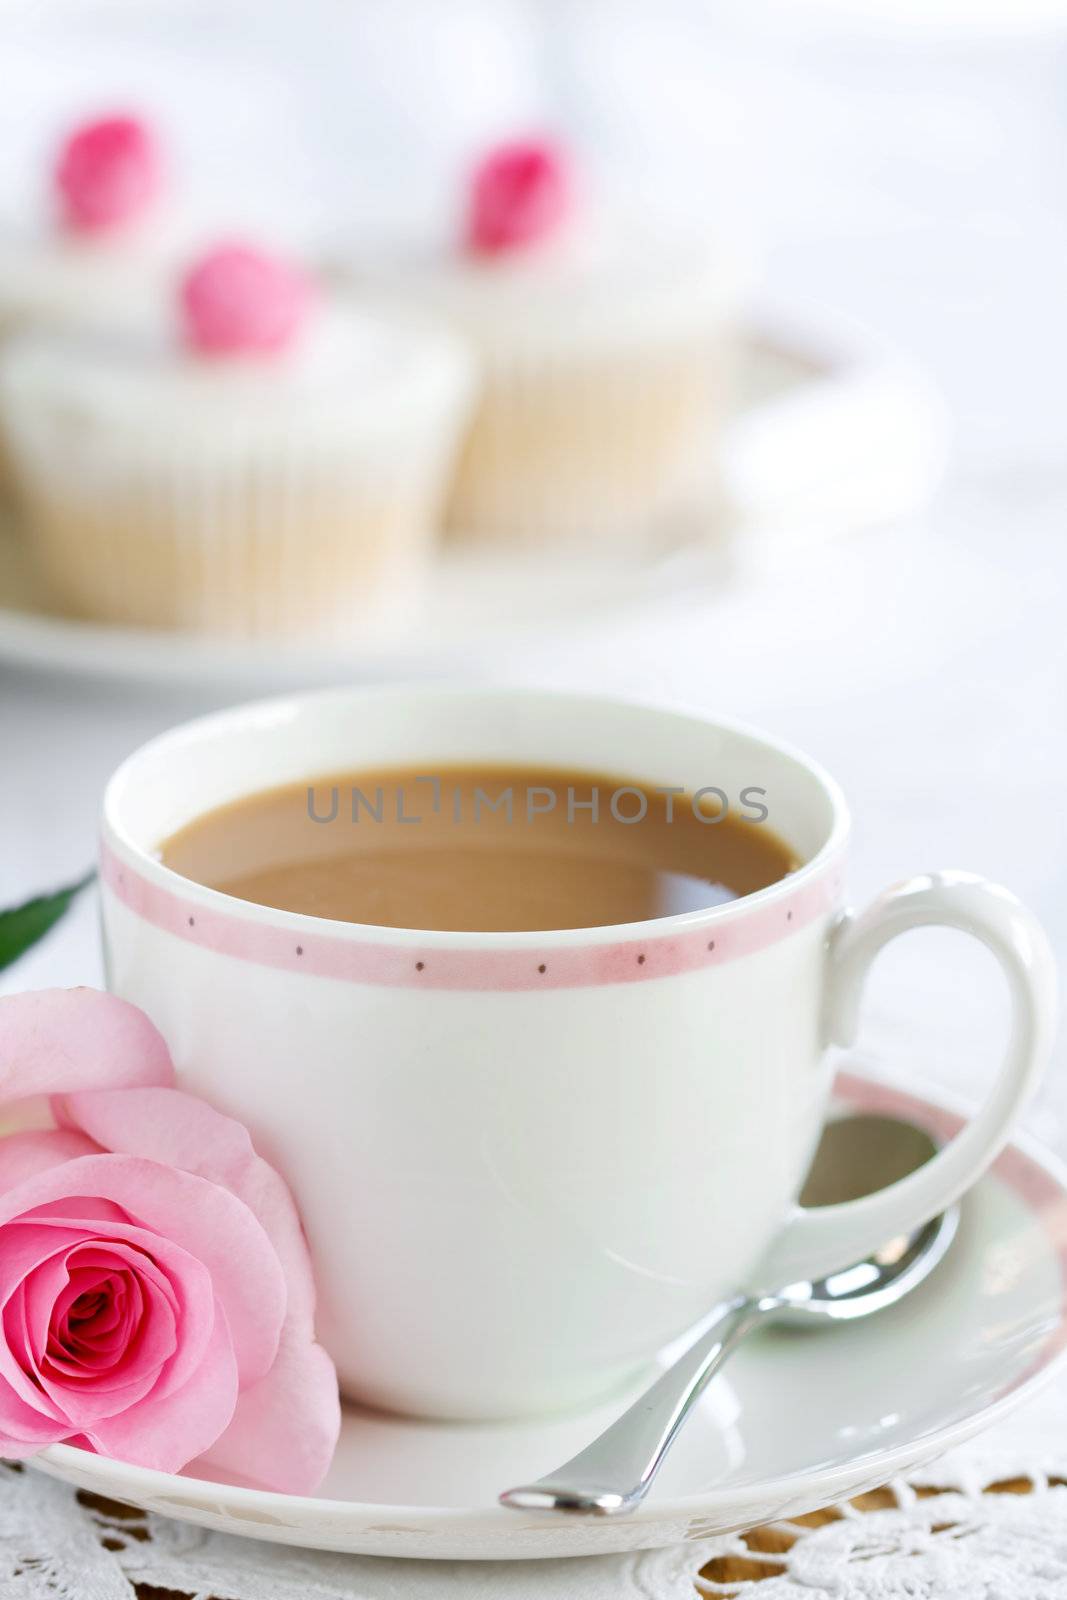 Cup of tea served with a rose and cupcakes